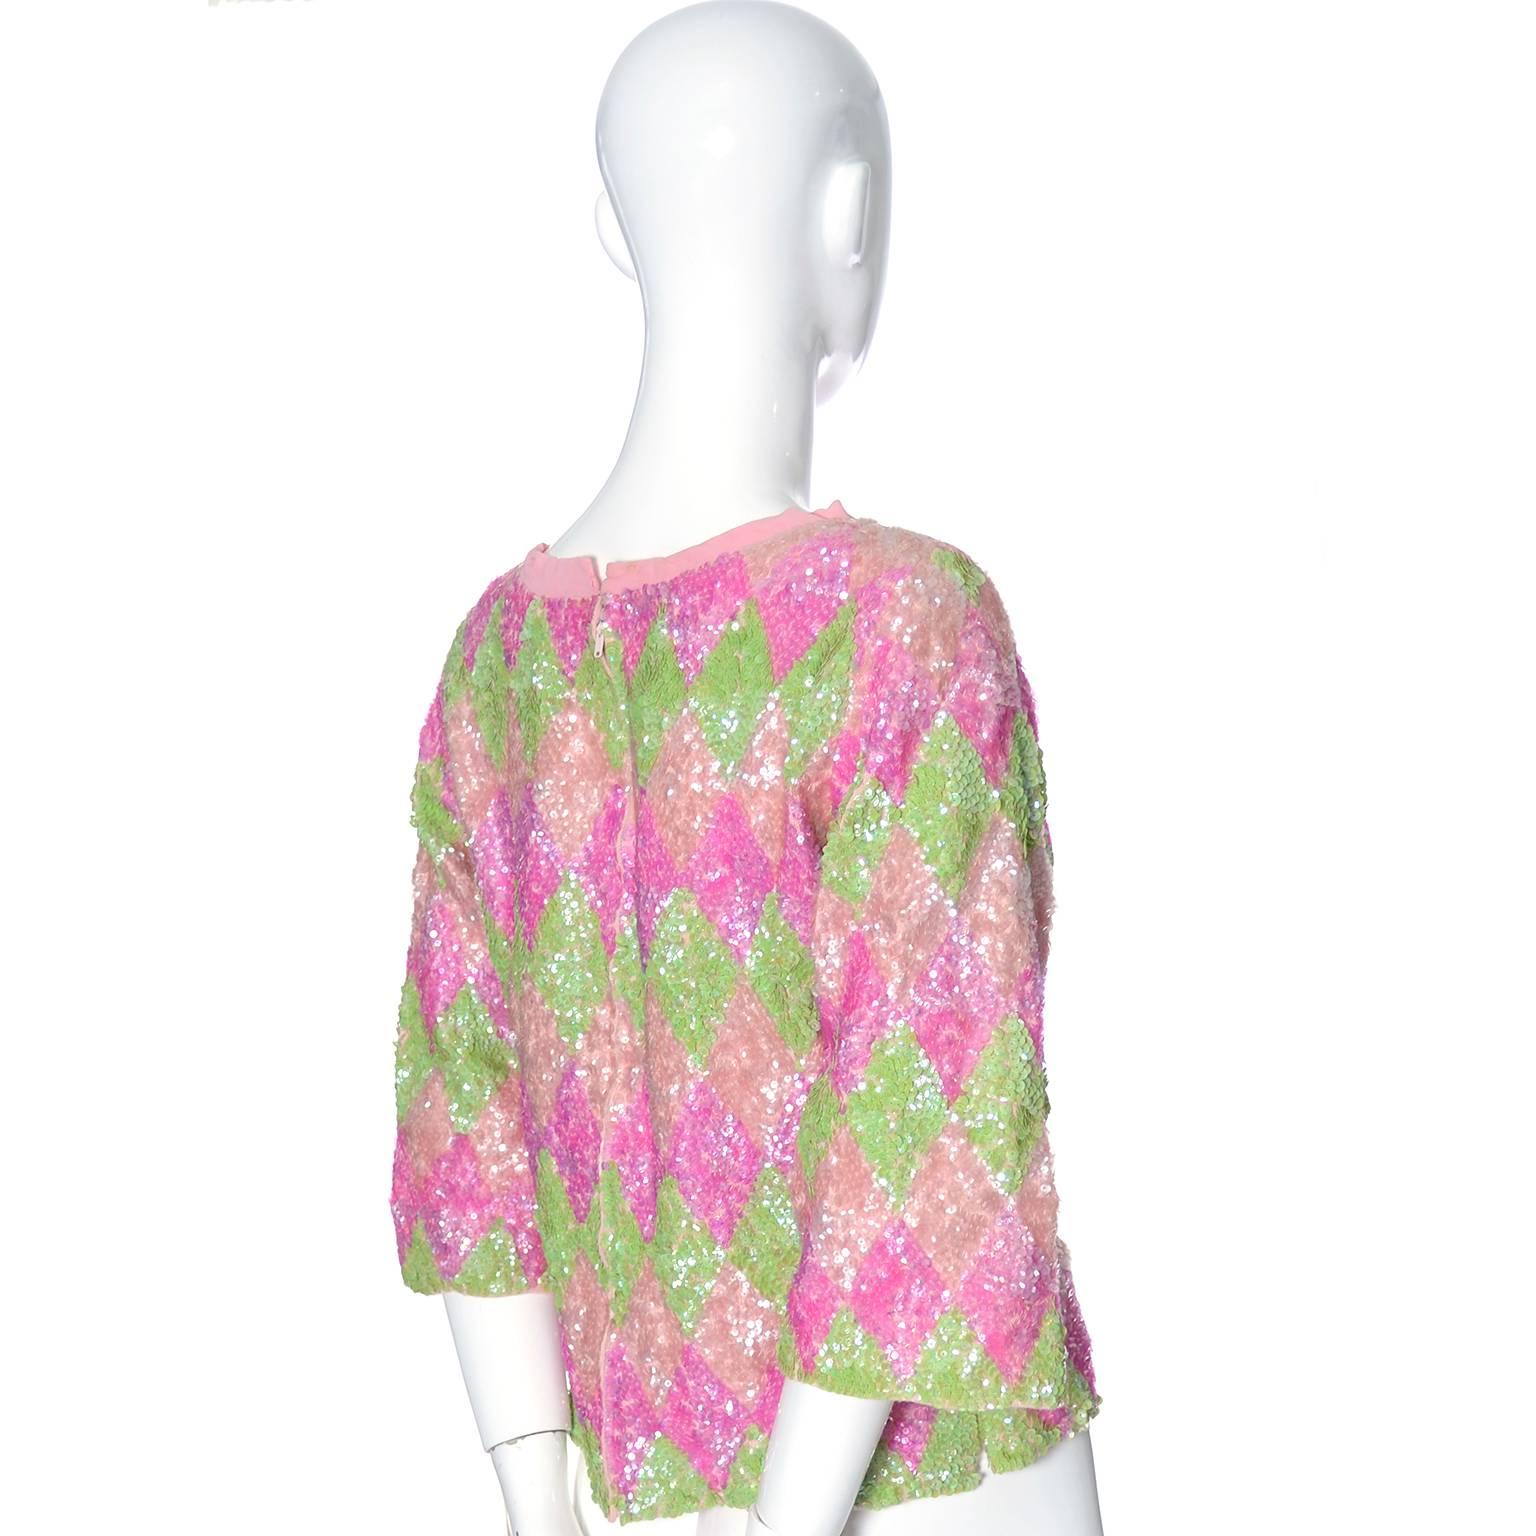 This is a lovely 1960s vintage Valentina Pastel sequin wool sweater top with 3/4 length sleeves and a back metal zipper.  The top is fully lined in pink silk and shows minor wear, mainly being some yellowing on the inside of the lining in the neck